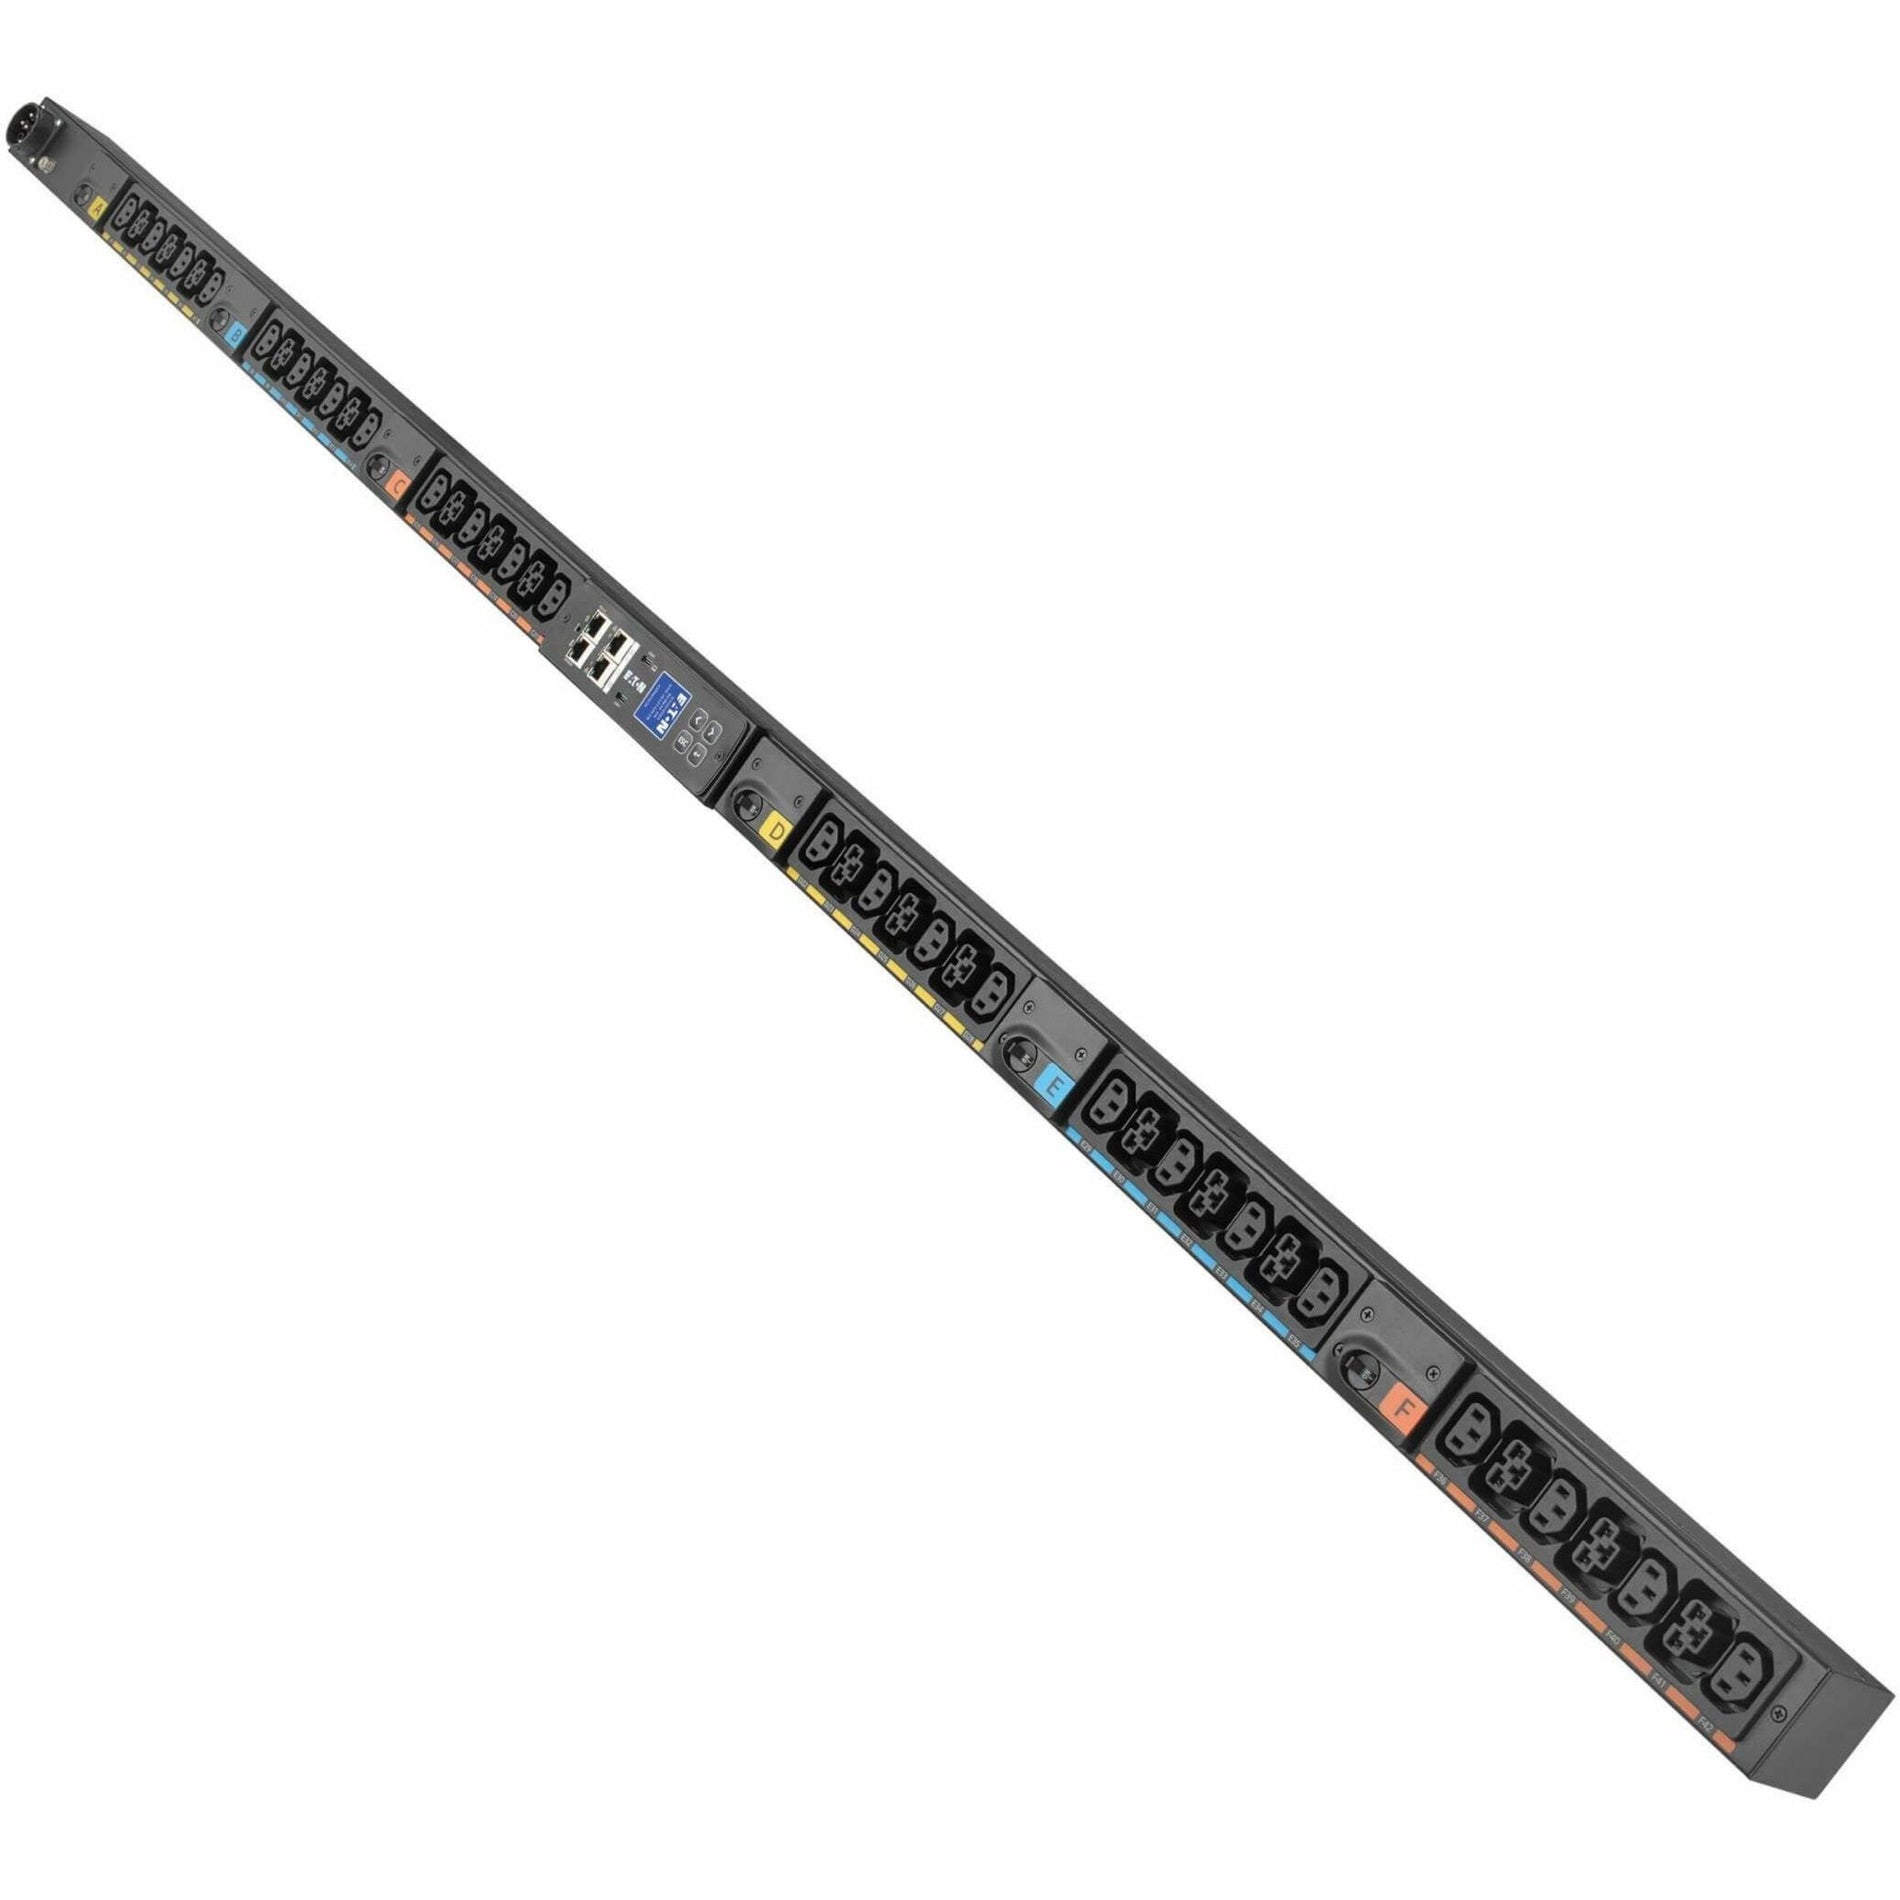 Eaton EVMAGU23X-3 G3 42-Outlets PDU, 23kVA Power Rating, Managed, Remote Outlet Switching